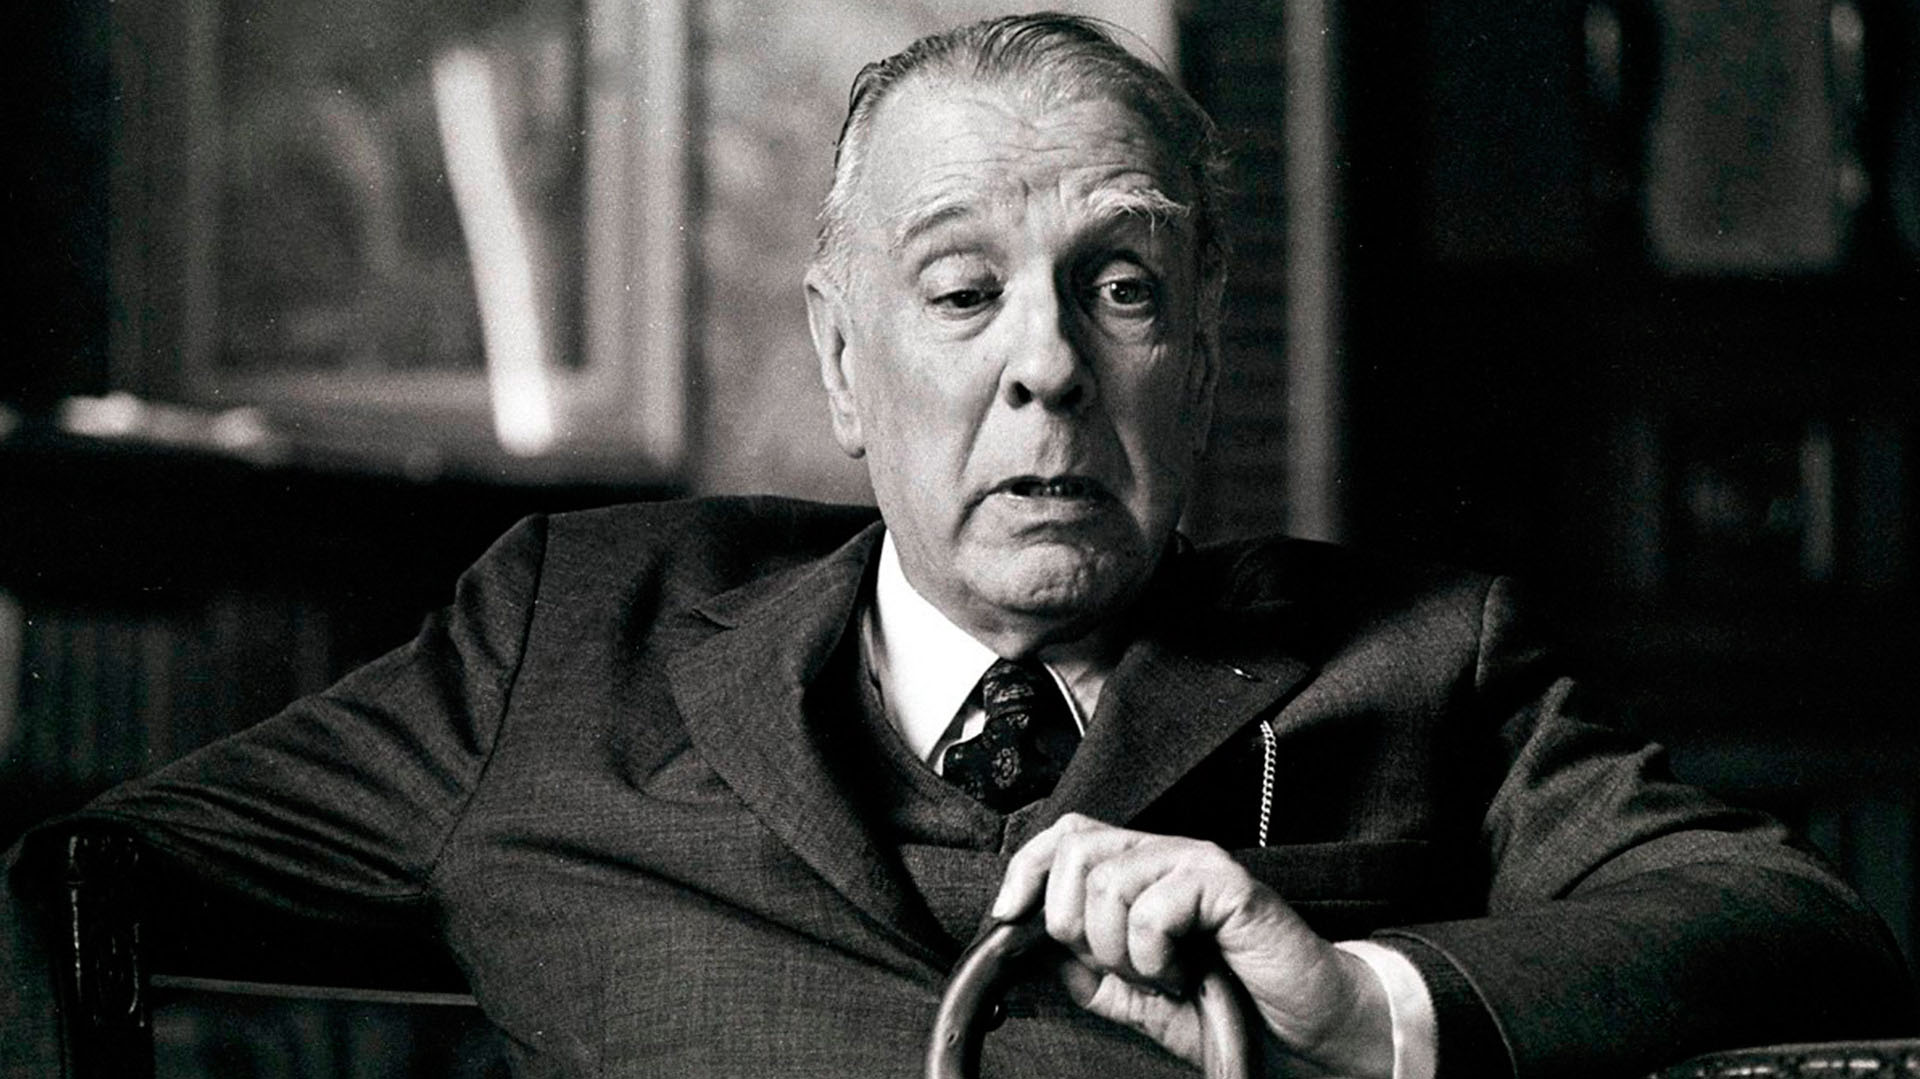 Jorge Luis Borges, Argentina In The Best Position Of The 100 Books Ever.